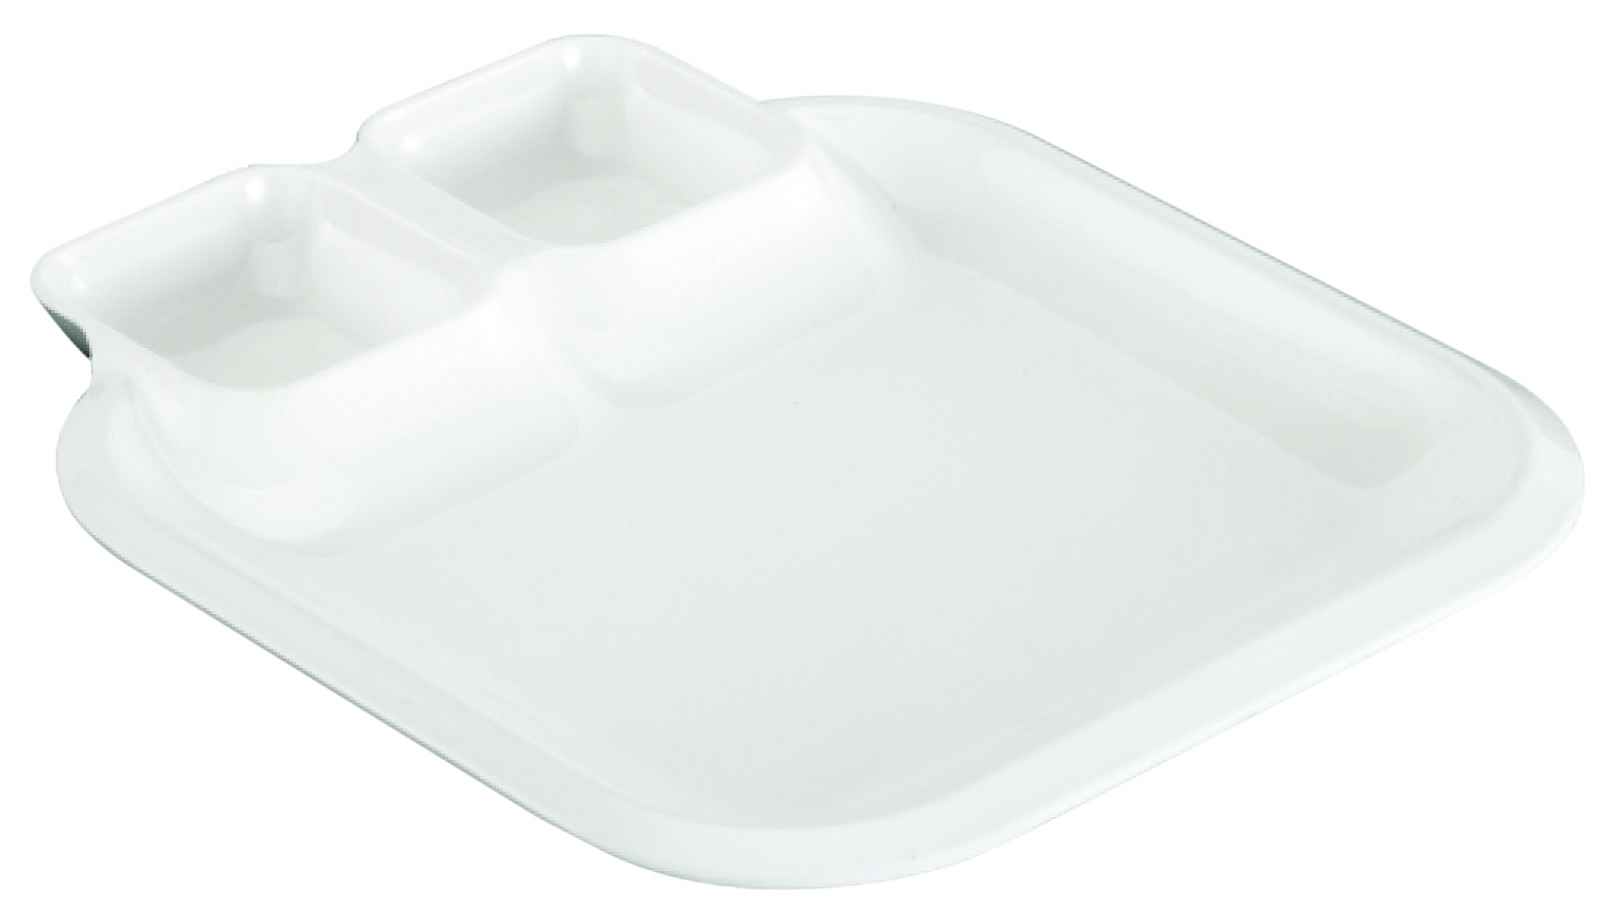 Dinewell Melamine Chip And Dip Serving Tray White